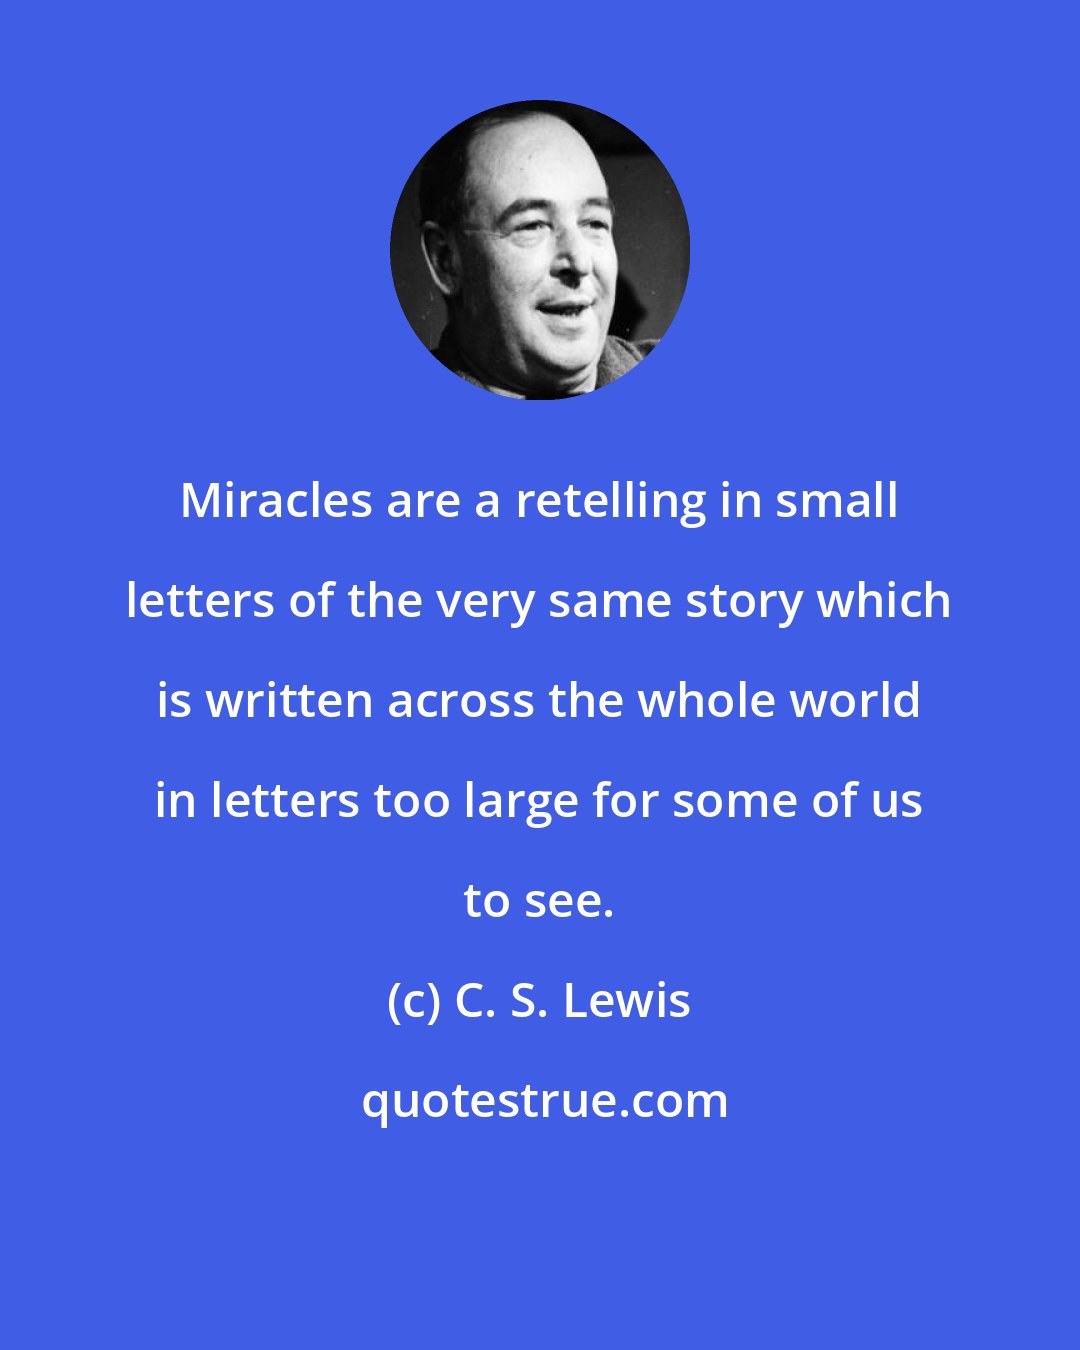 C. S. Lewis: Miracles are a retelling in small letters of the very same story which is written across the whole world in letters too large for some of us to see.